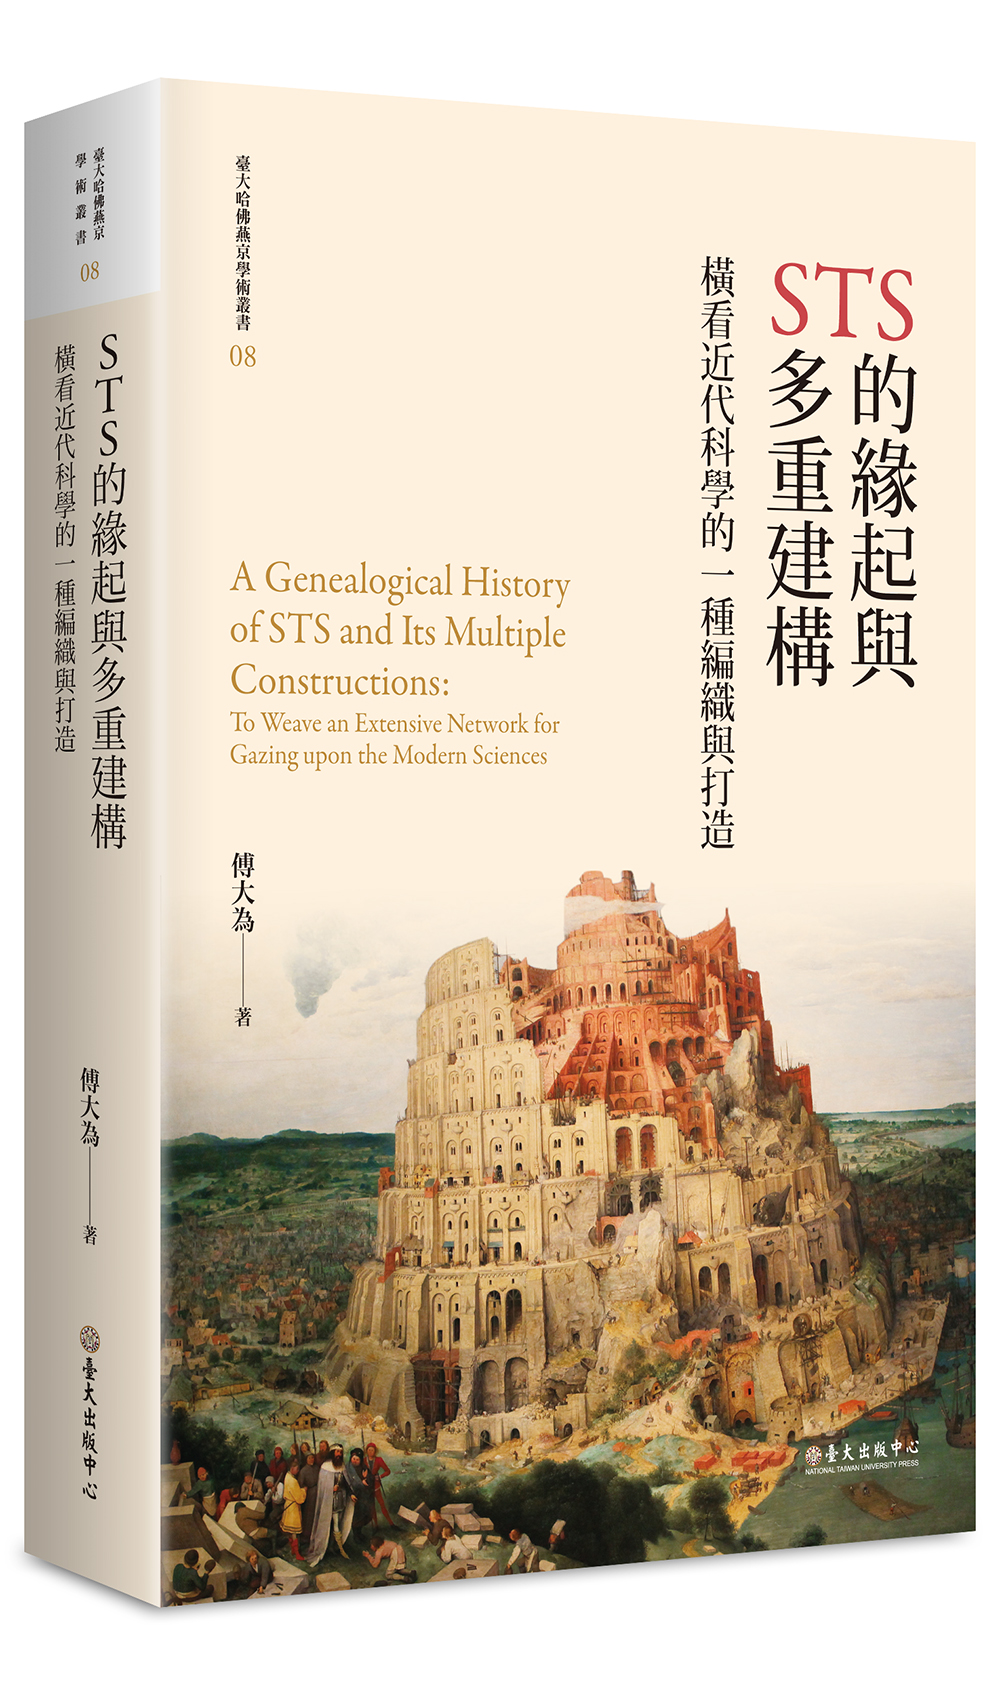 A Genealogical History of STS and Its Multiple Constructions: To Weave an Extensive Network for Gazing upon the Modern Sciences (paperback)